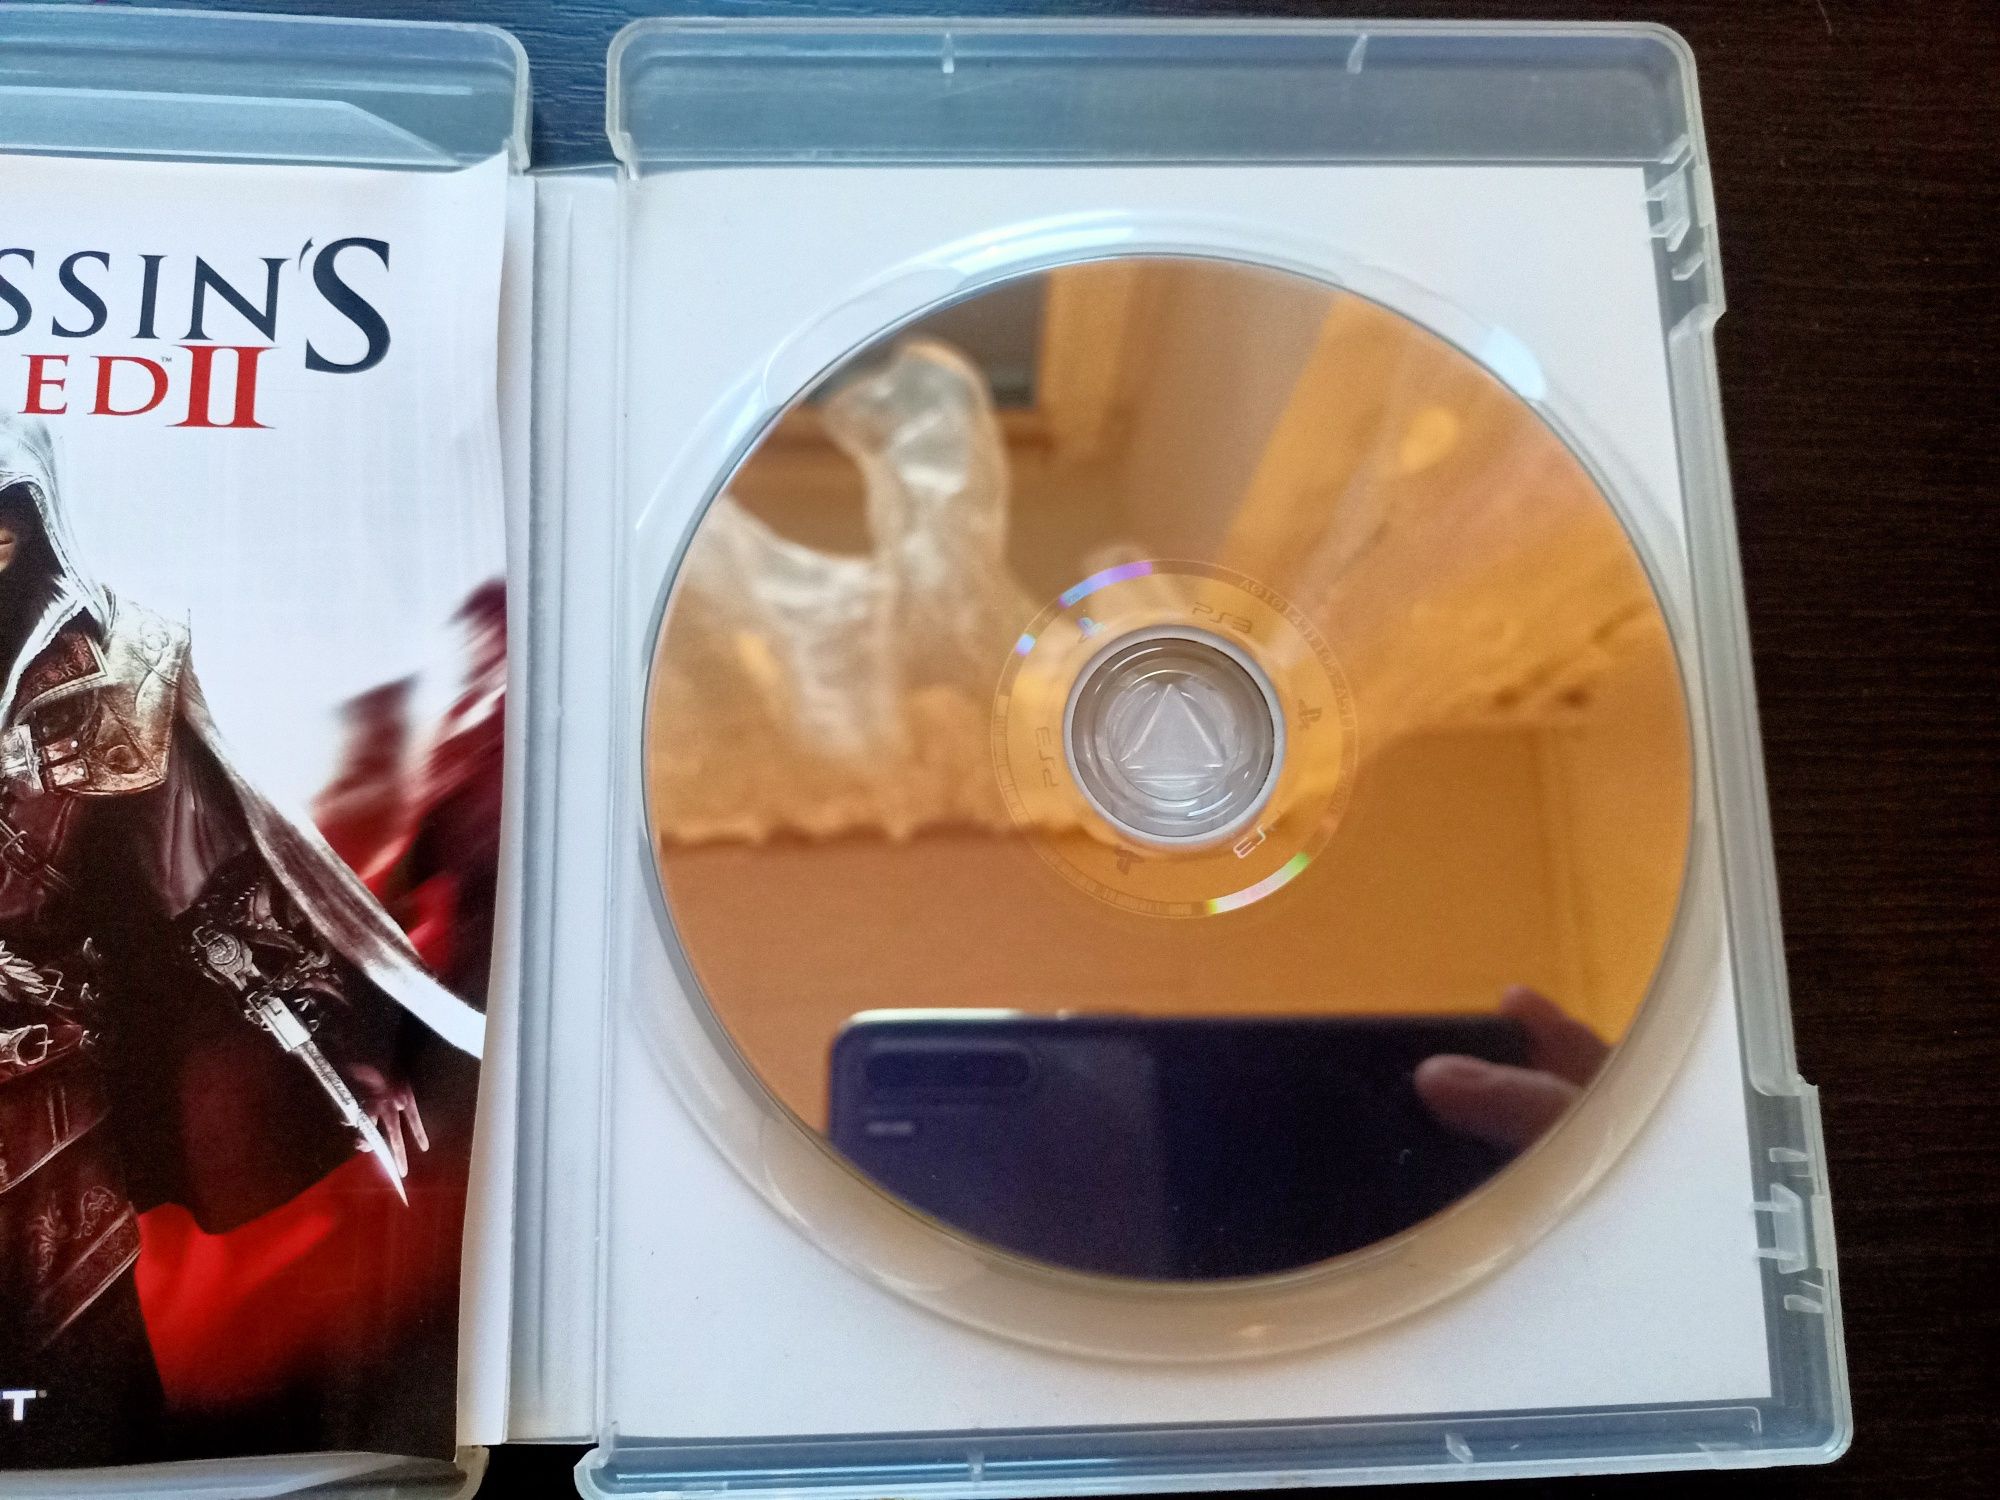 Assassin's Creed 2 PS3